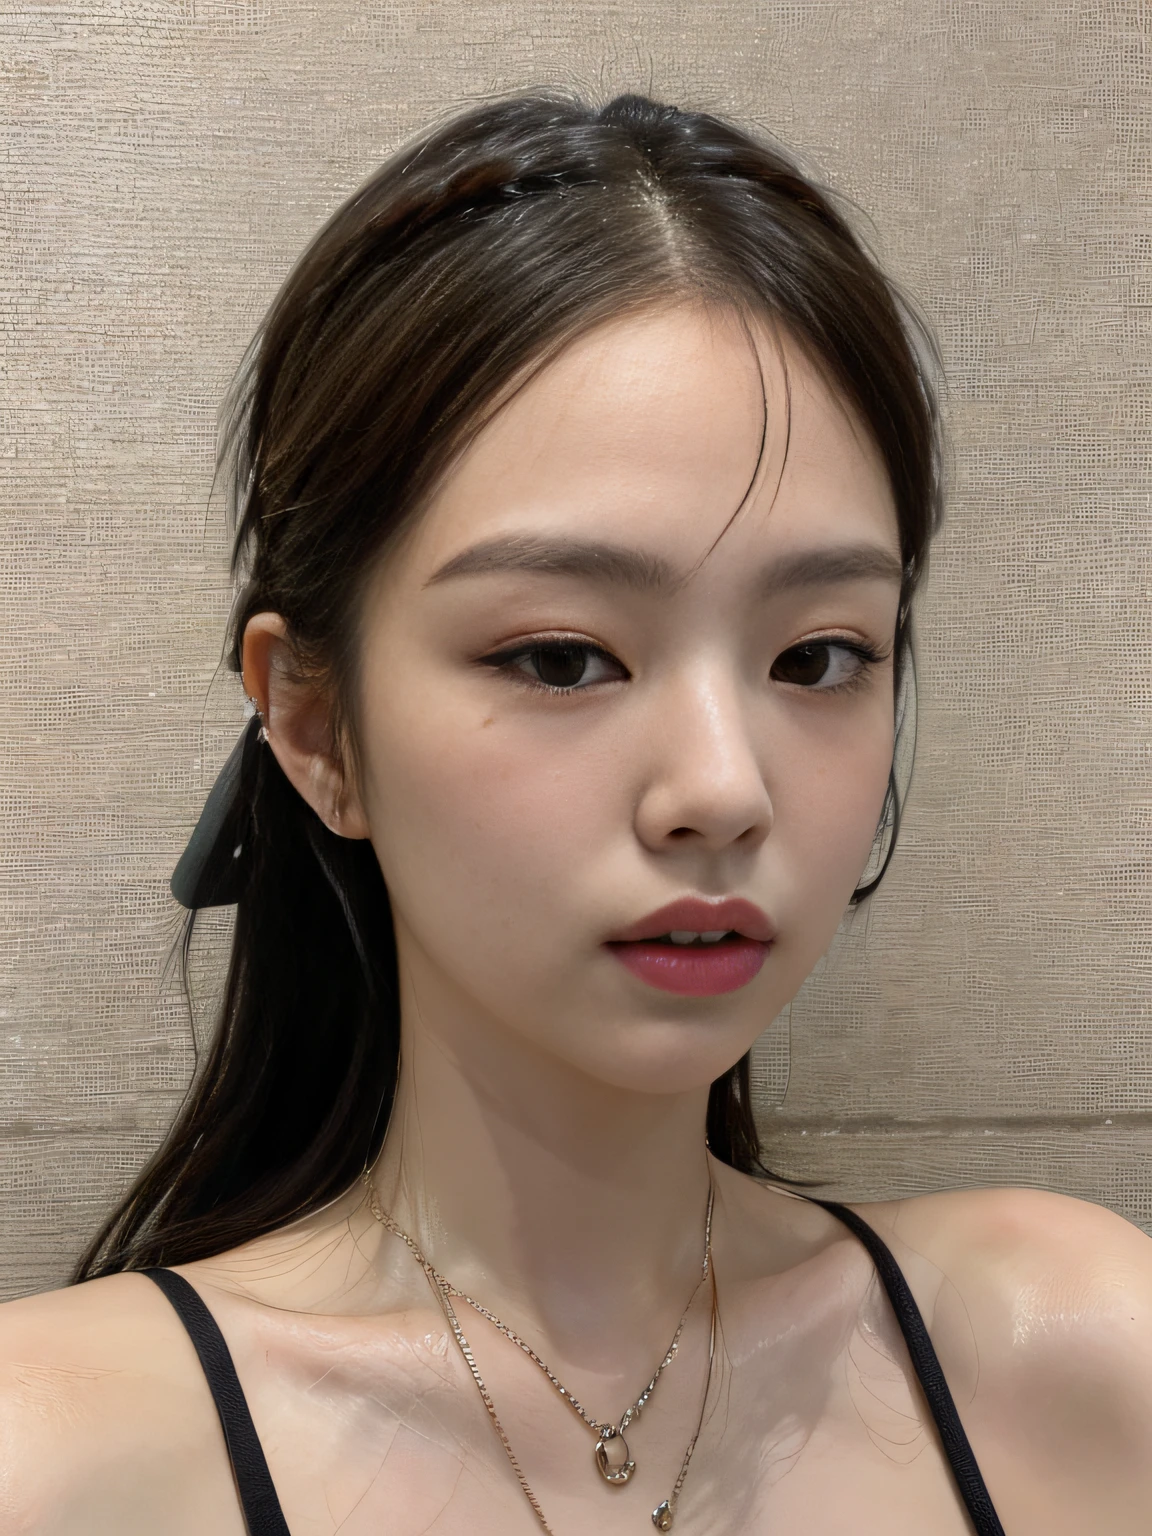 Best Quality, Jjennie Face Shape, Ultra High Resolution, Supermodel, (Realism: 1 Girl.8), RAW Photo, 1 Girl One Girl, Bare Shoulders, Colored Dirty Braids, In the Dark, Deep Shadow, Understated, Cold Light